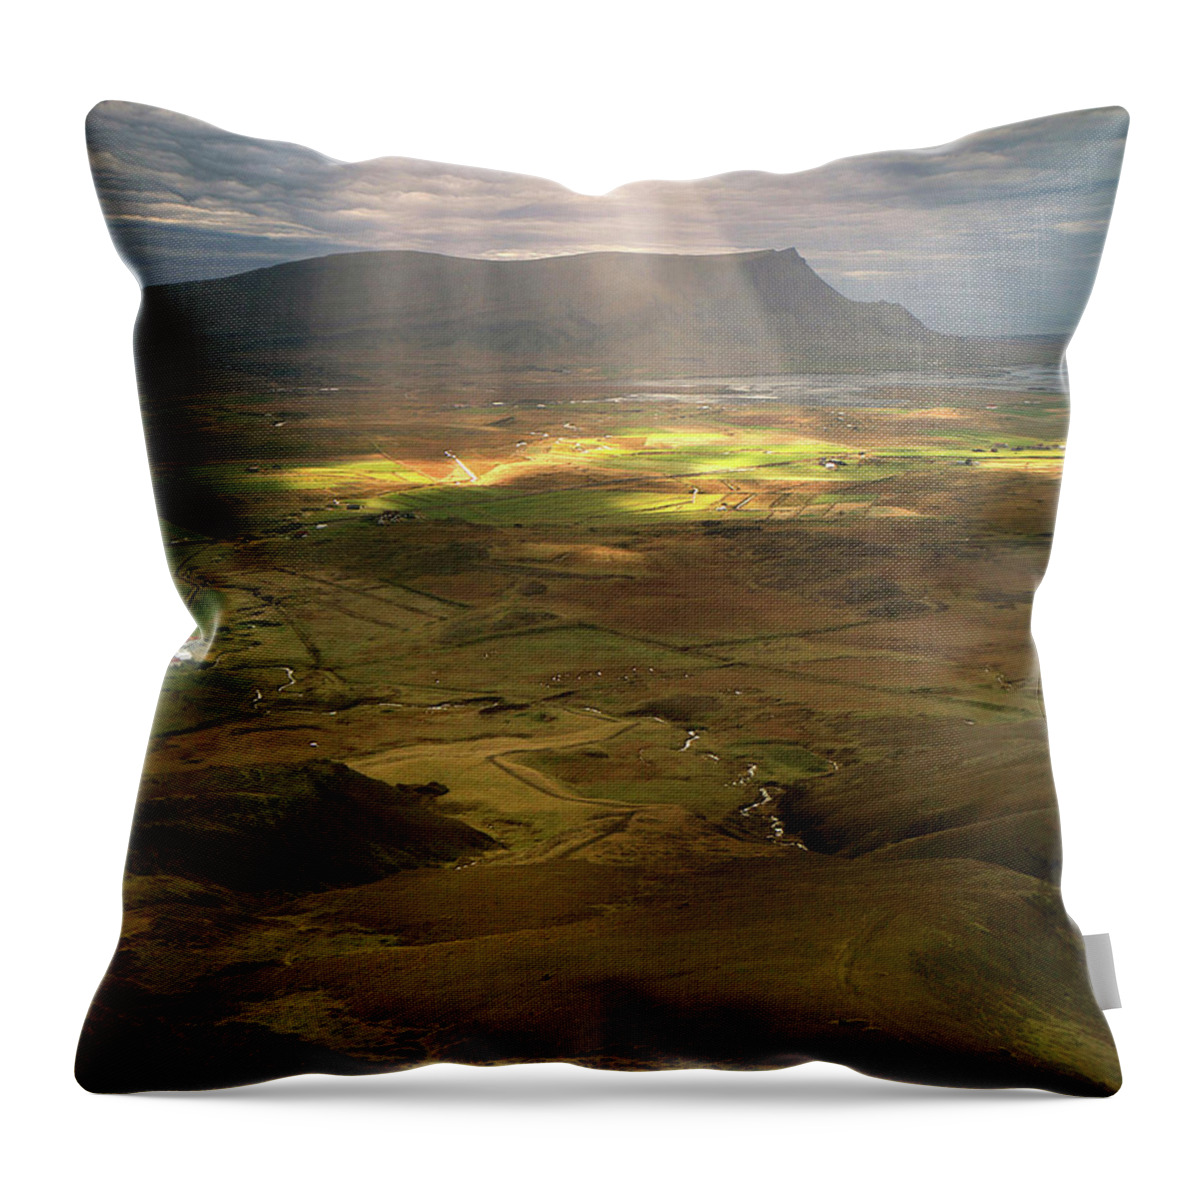 Tranquility Throw Pillow featuring the photograph Akrafjall Iceland by Sverrir Thorolfsson Iceland